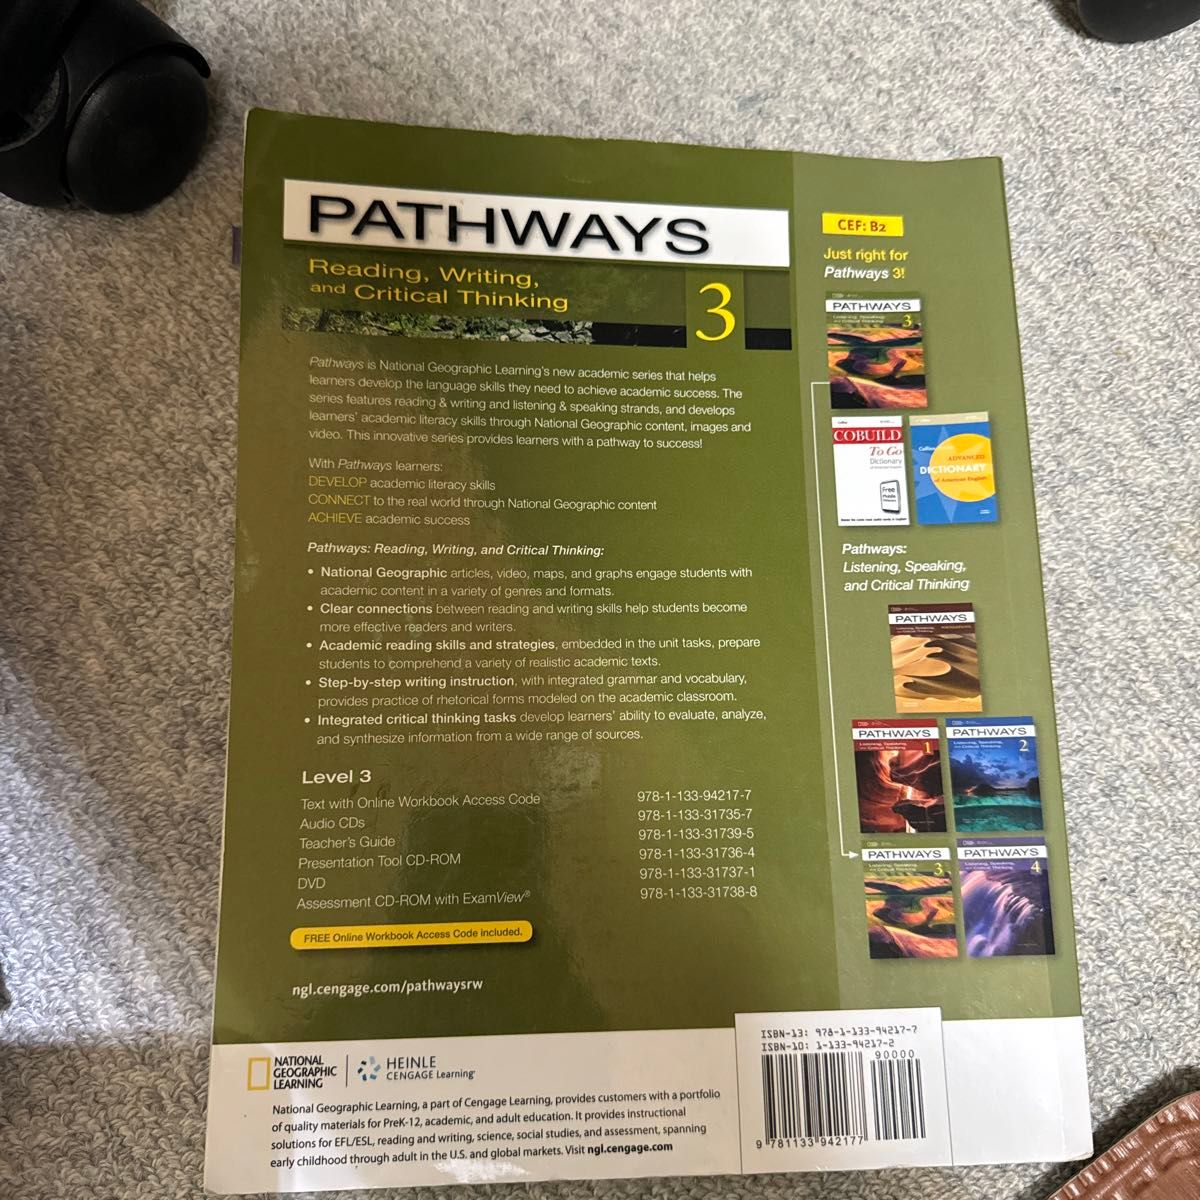 Pathways reading,writing and Critical thinking 